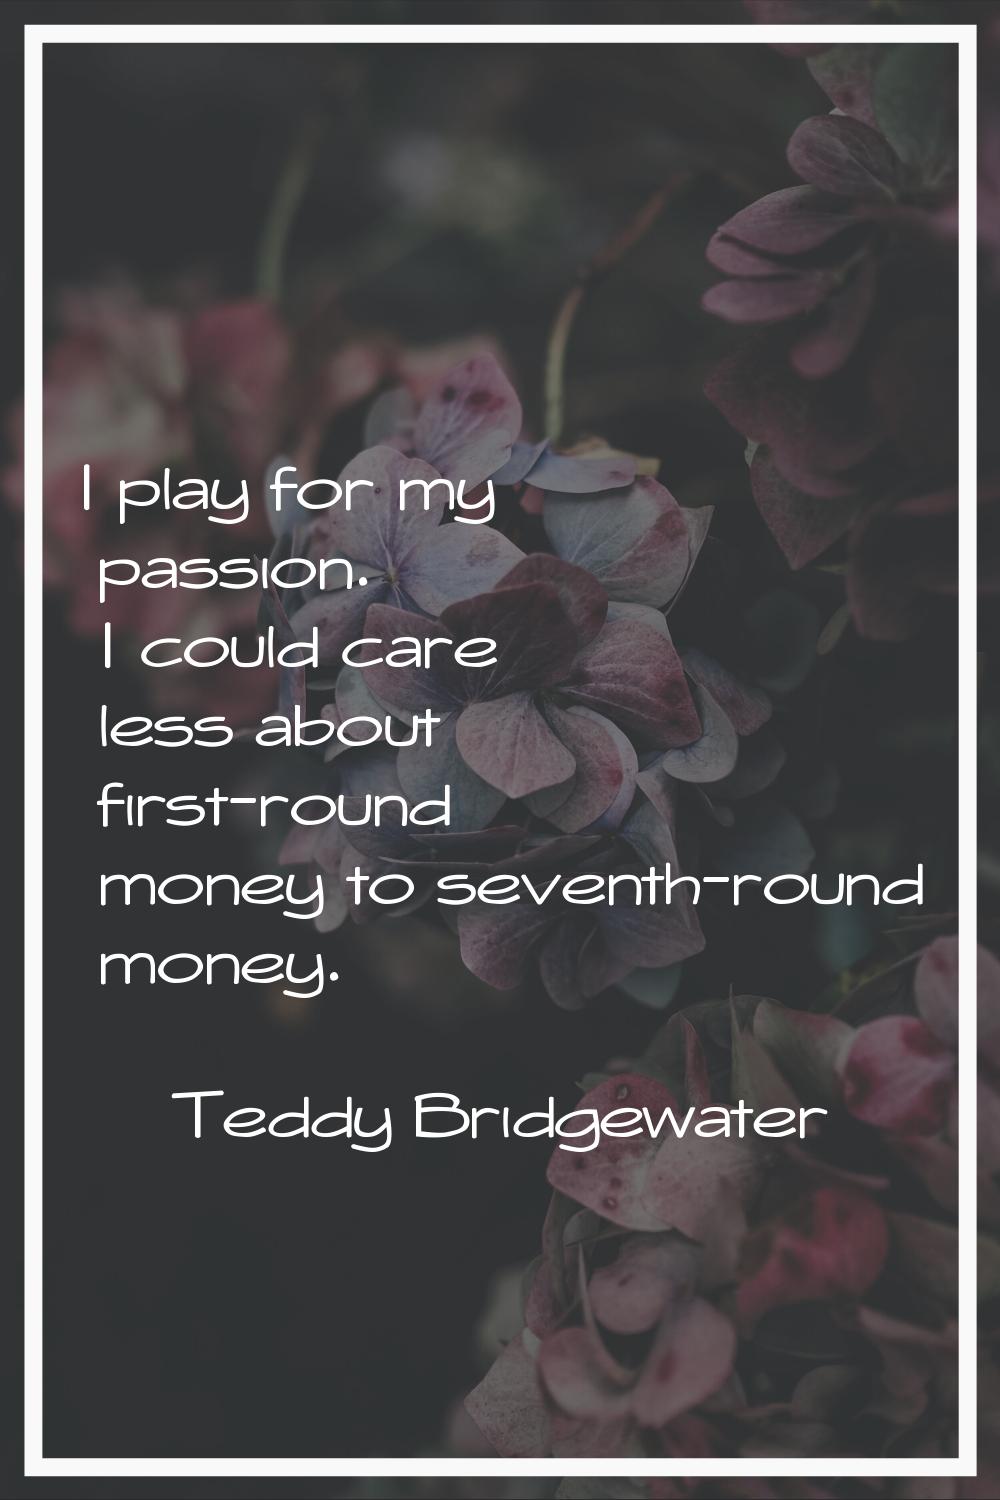 I play for my passion. I could care less about first-round money to seventh-round money.